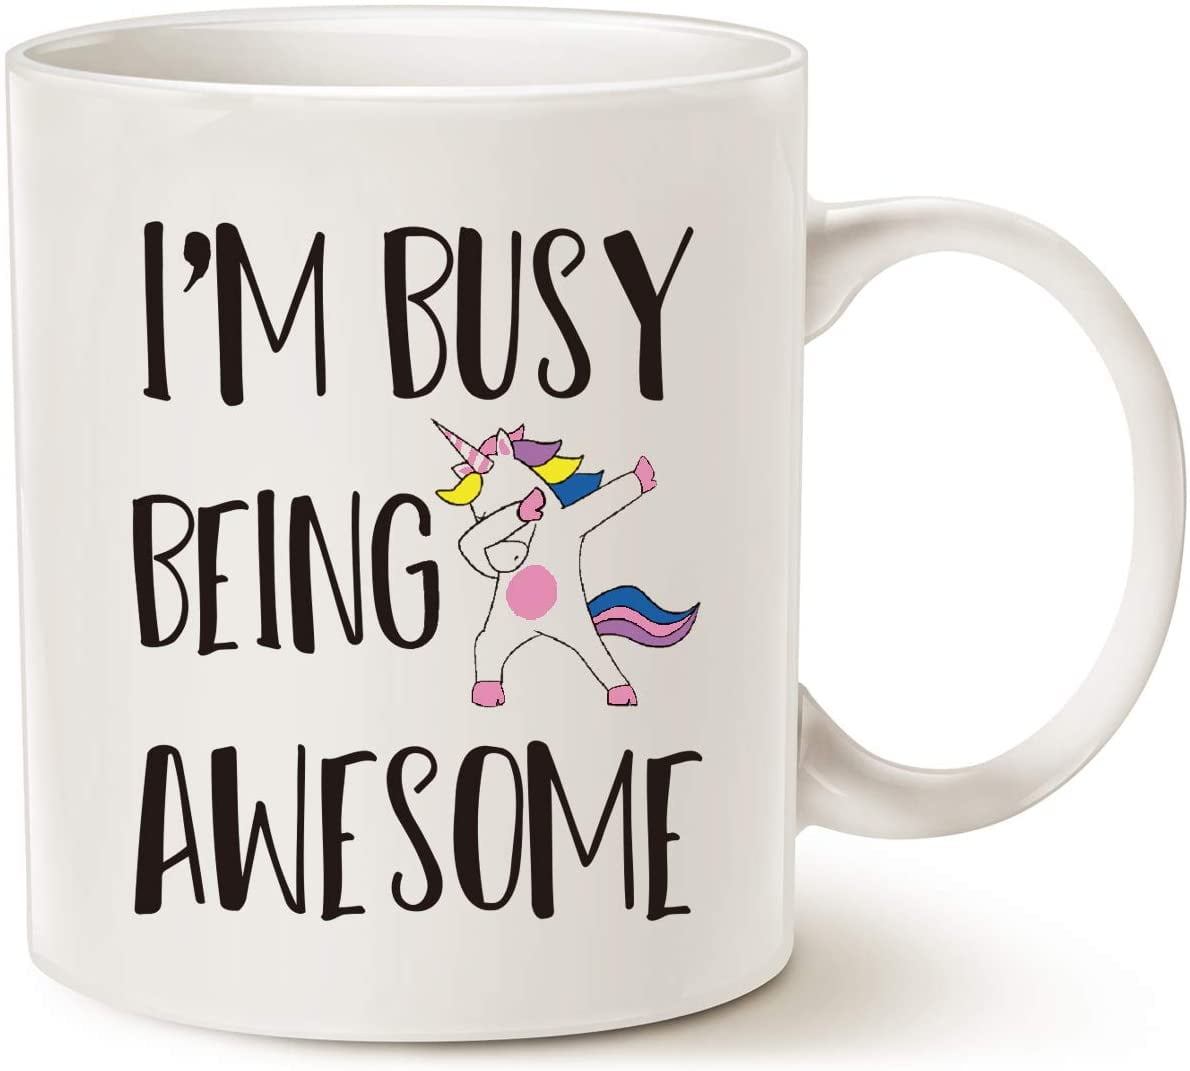 Funny Quote Saying Coffee Mug Christmas Gifts, I'm Busy Being Awesome Birthday  Gift Ideas for Friend Cup, White 11 Oz 